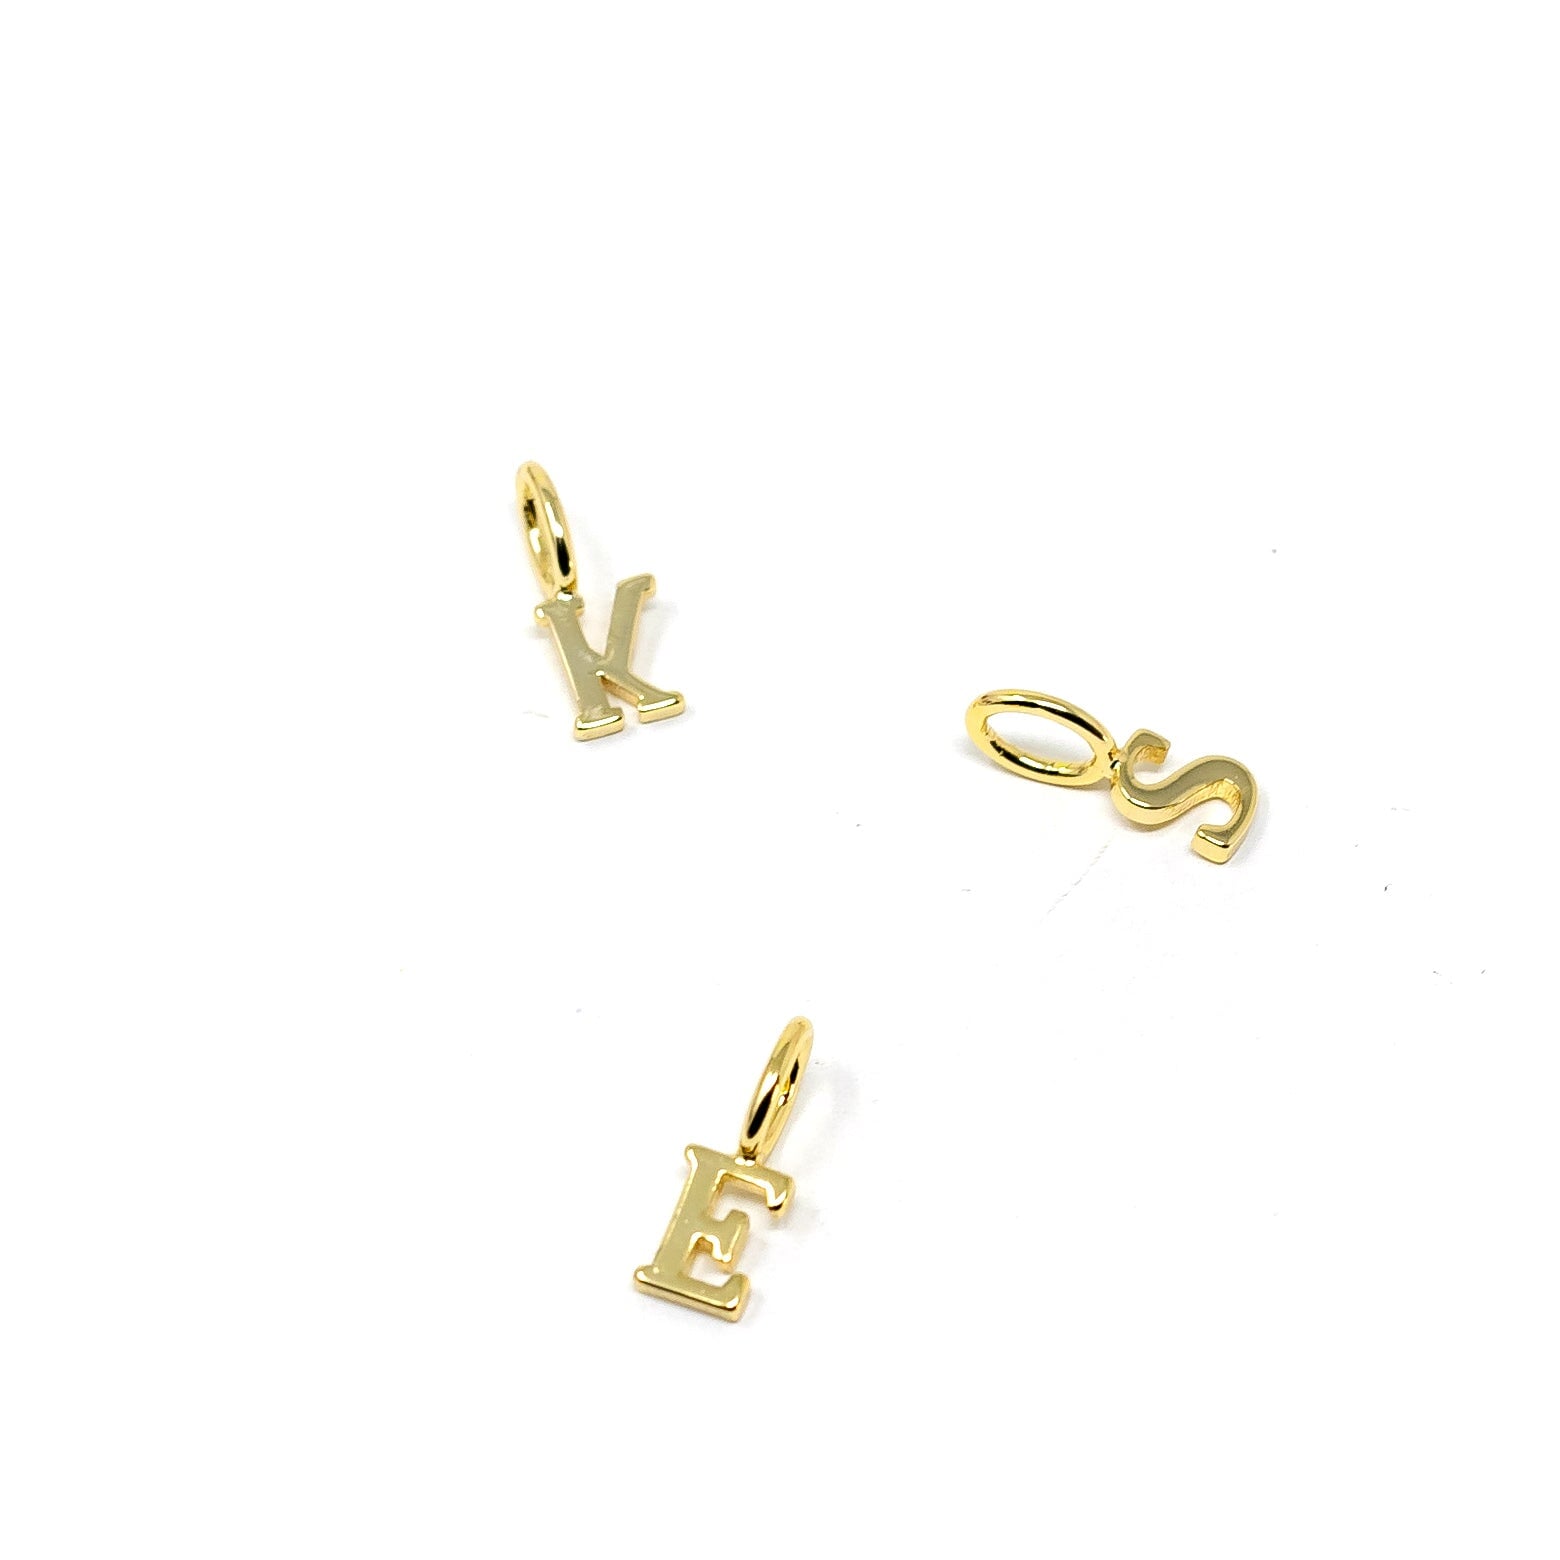 Solid Initial Charm Charms & Pendants The Sis Kiss